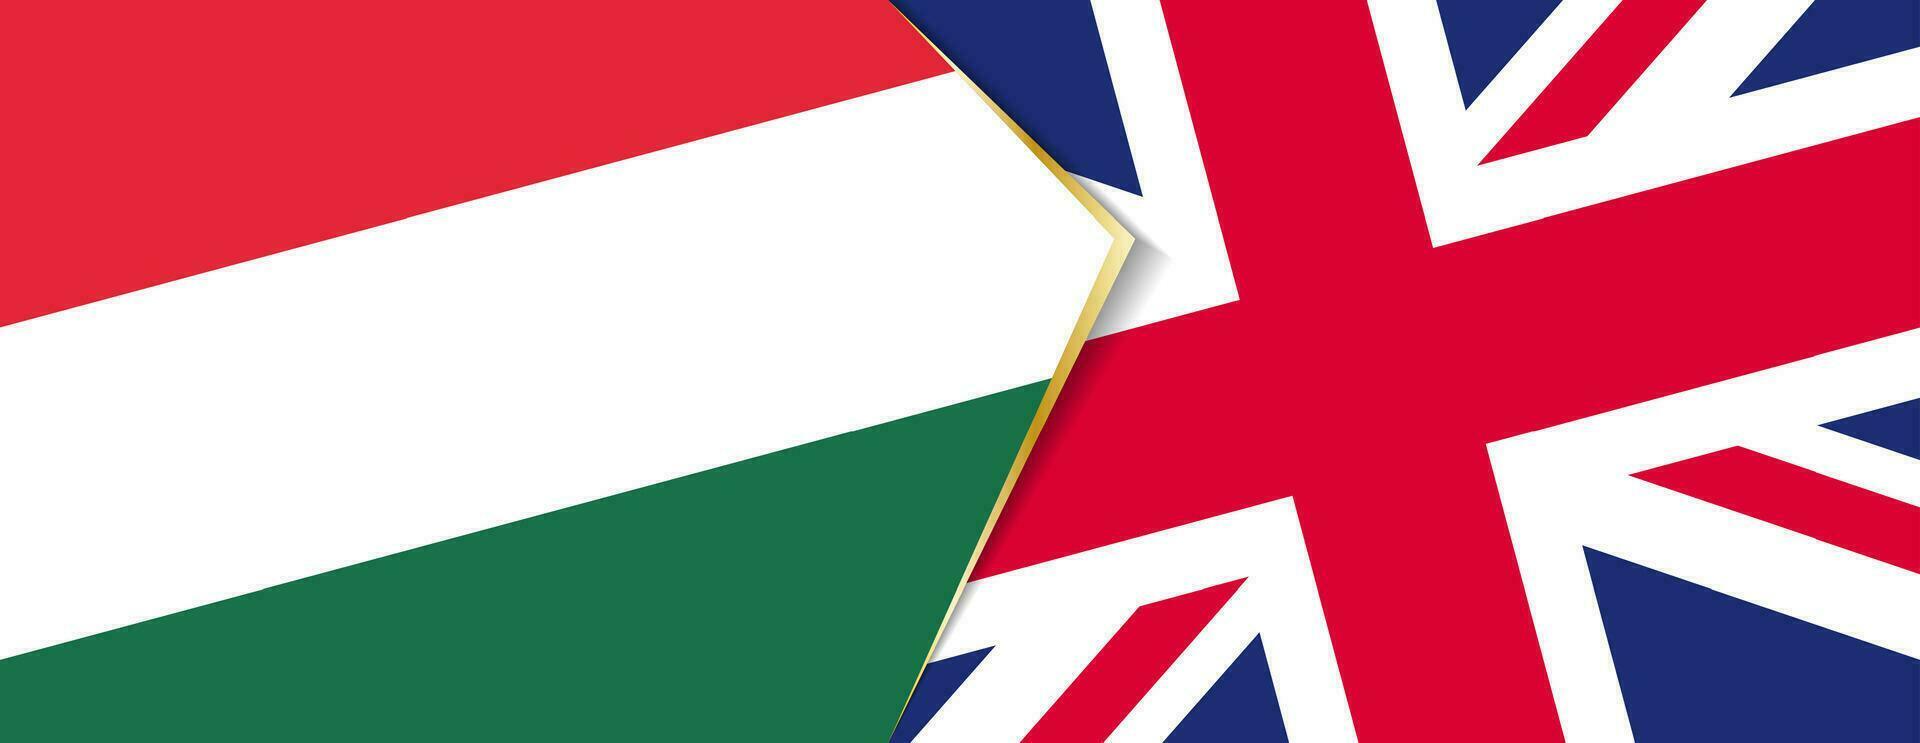 Hungary and United Kingdom flags, two vector flags.